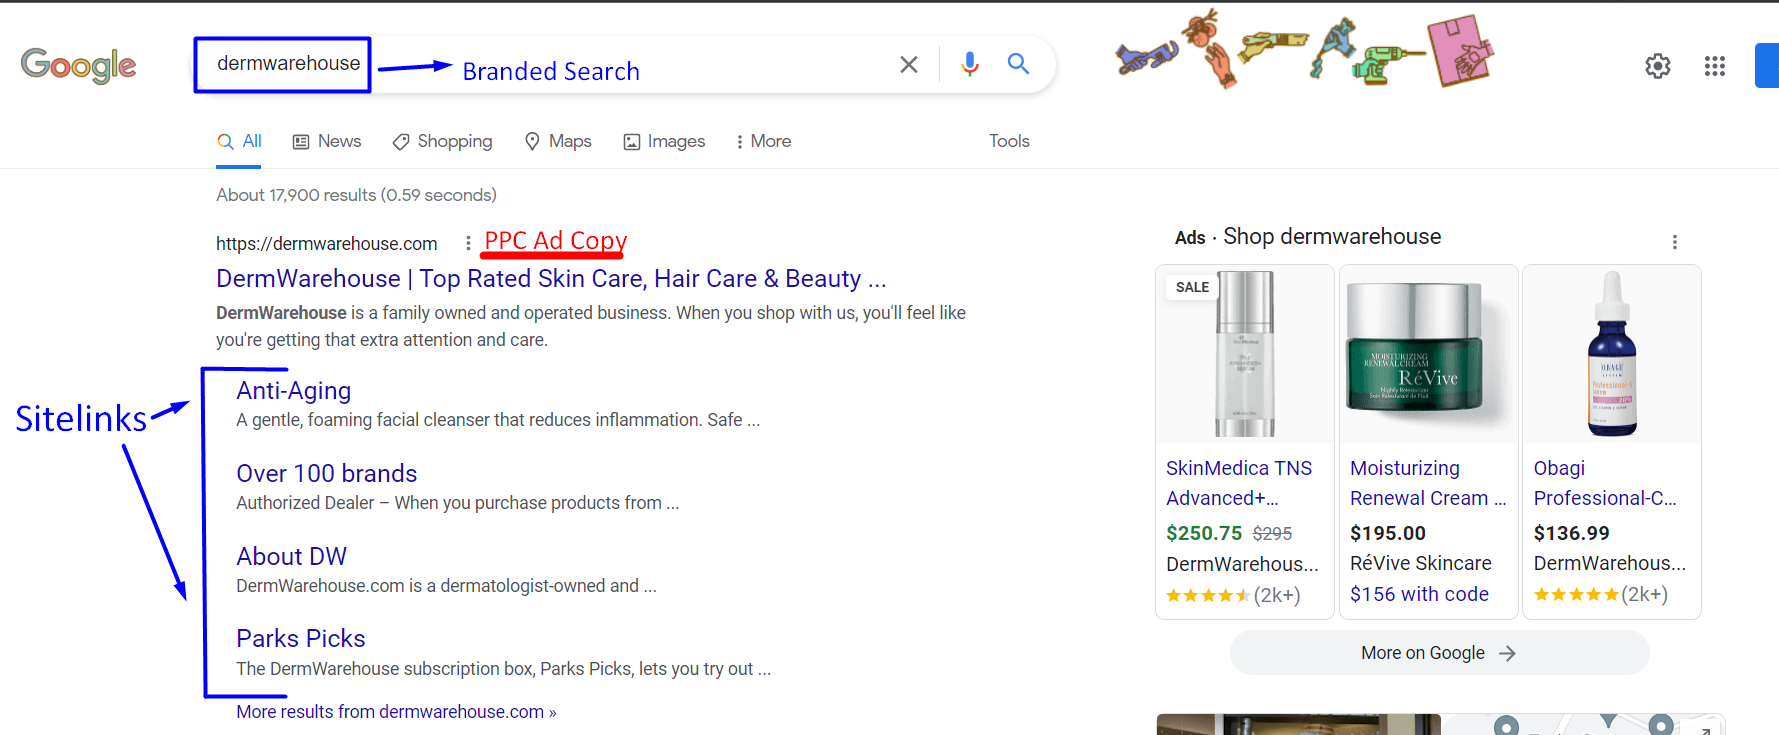 Ad Copy within Branded PPC Search